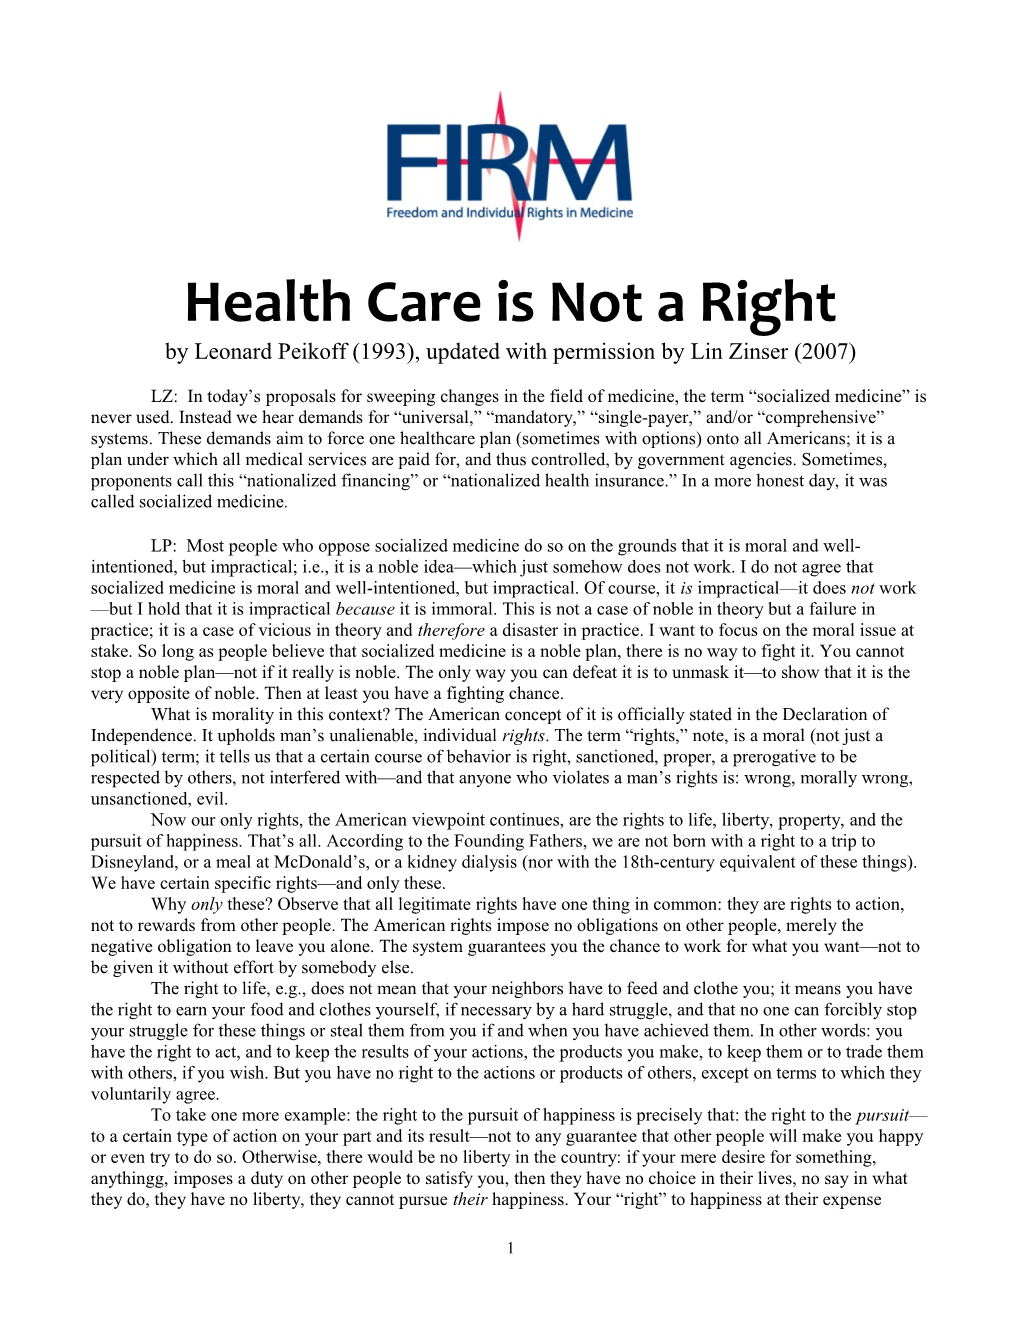 Health Care Is Not a Right